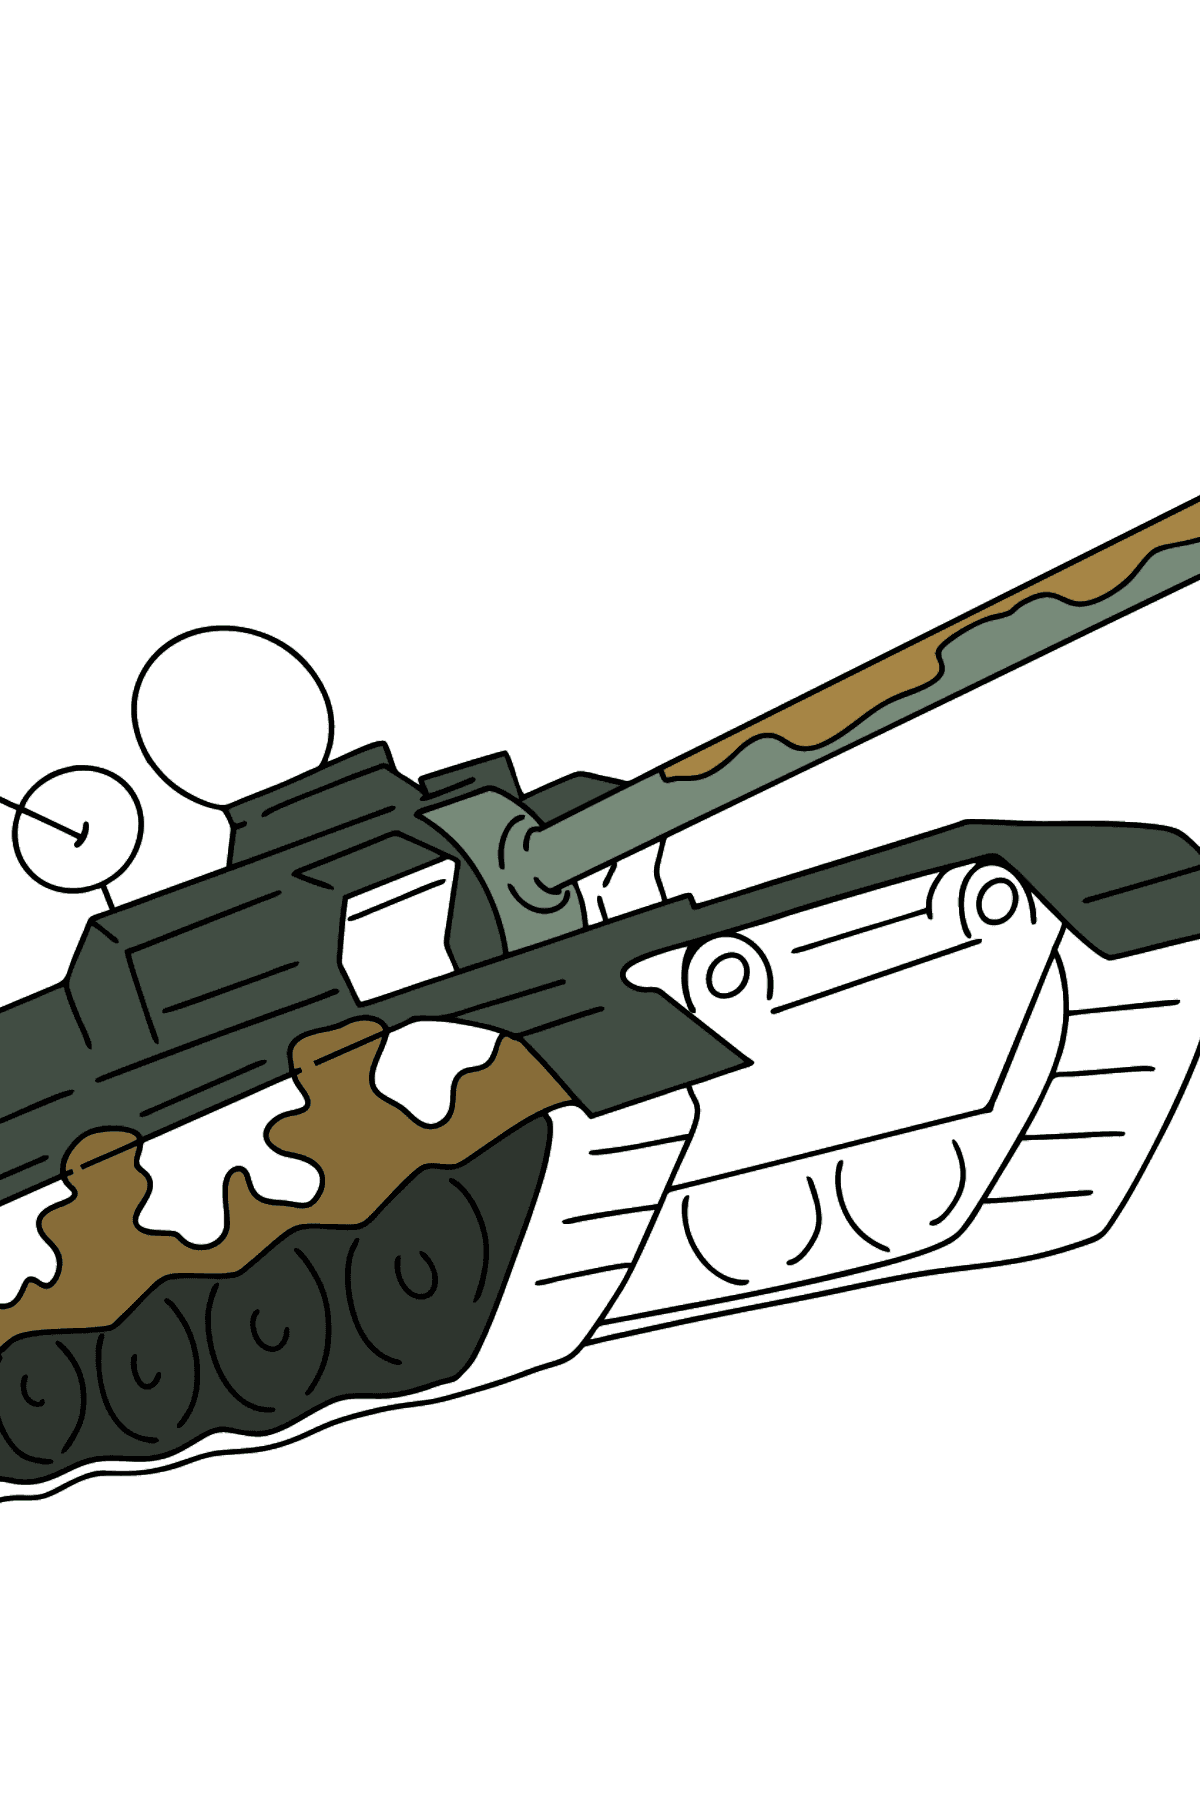 Military Tank coloring page - Coloring Pages for Kids